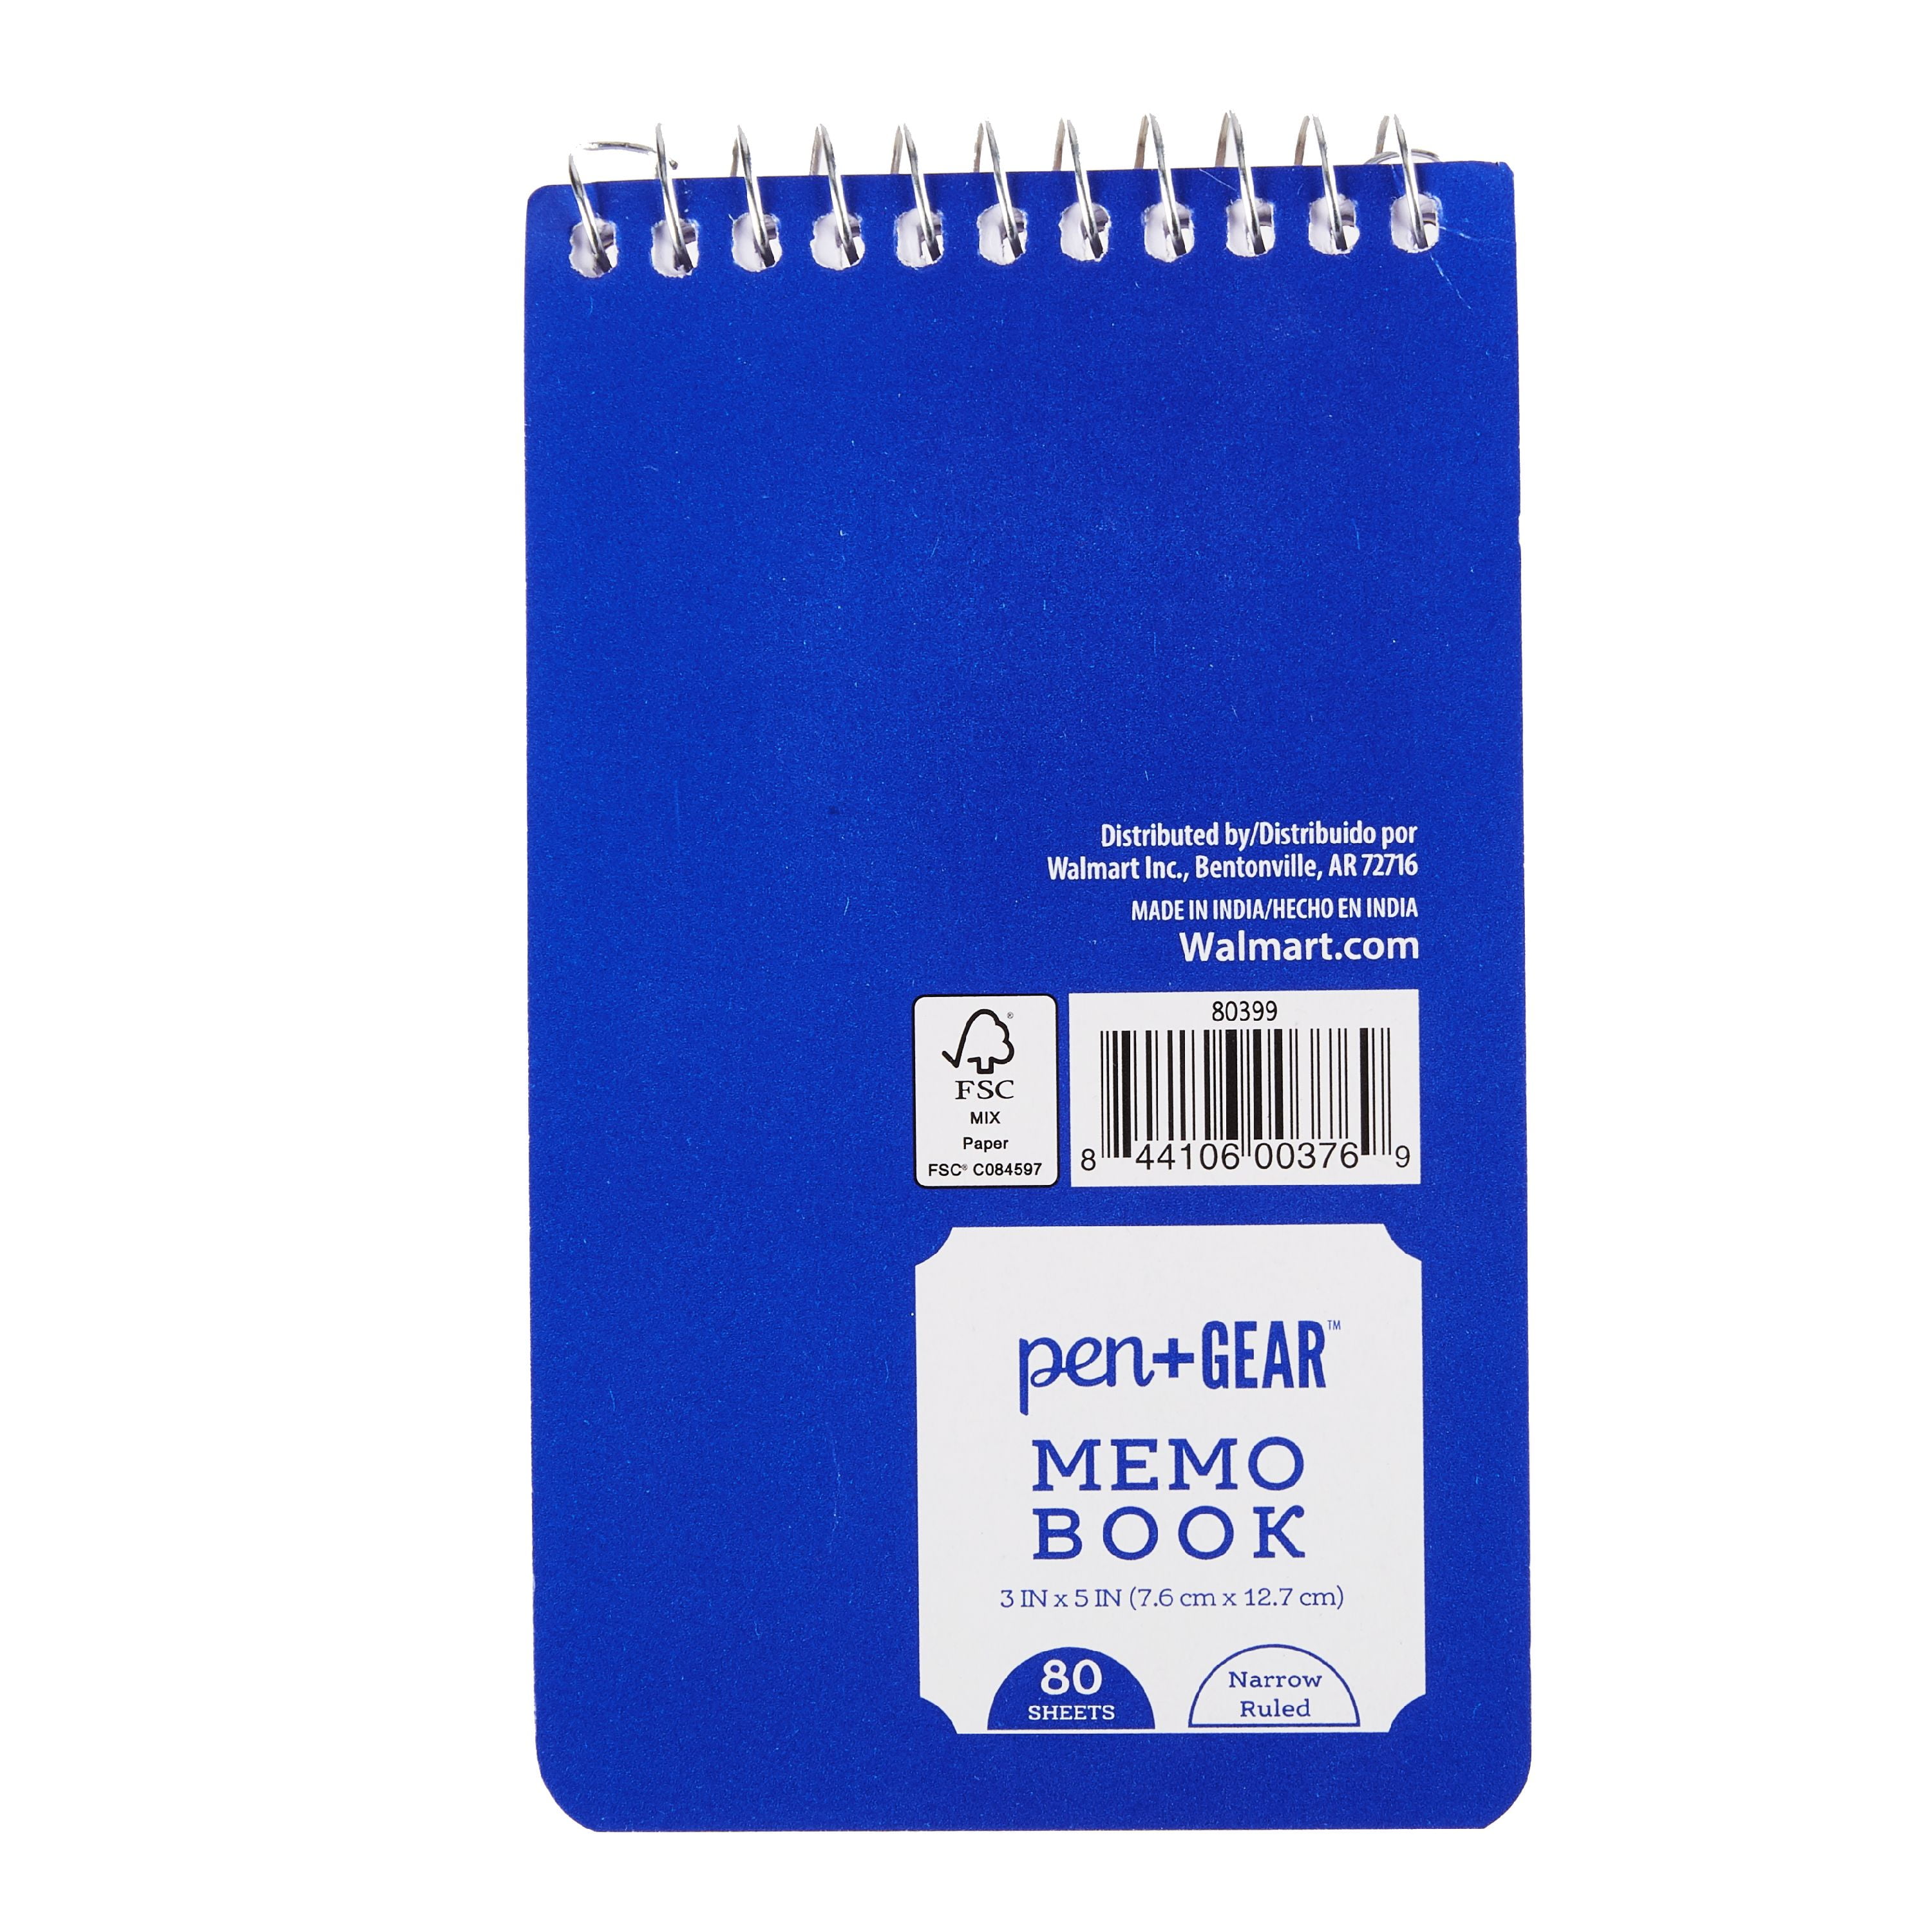 1 Magnetic or Small Spiral Memo Pads & Others-6 different style Notepads- 